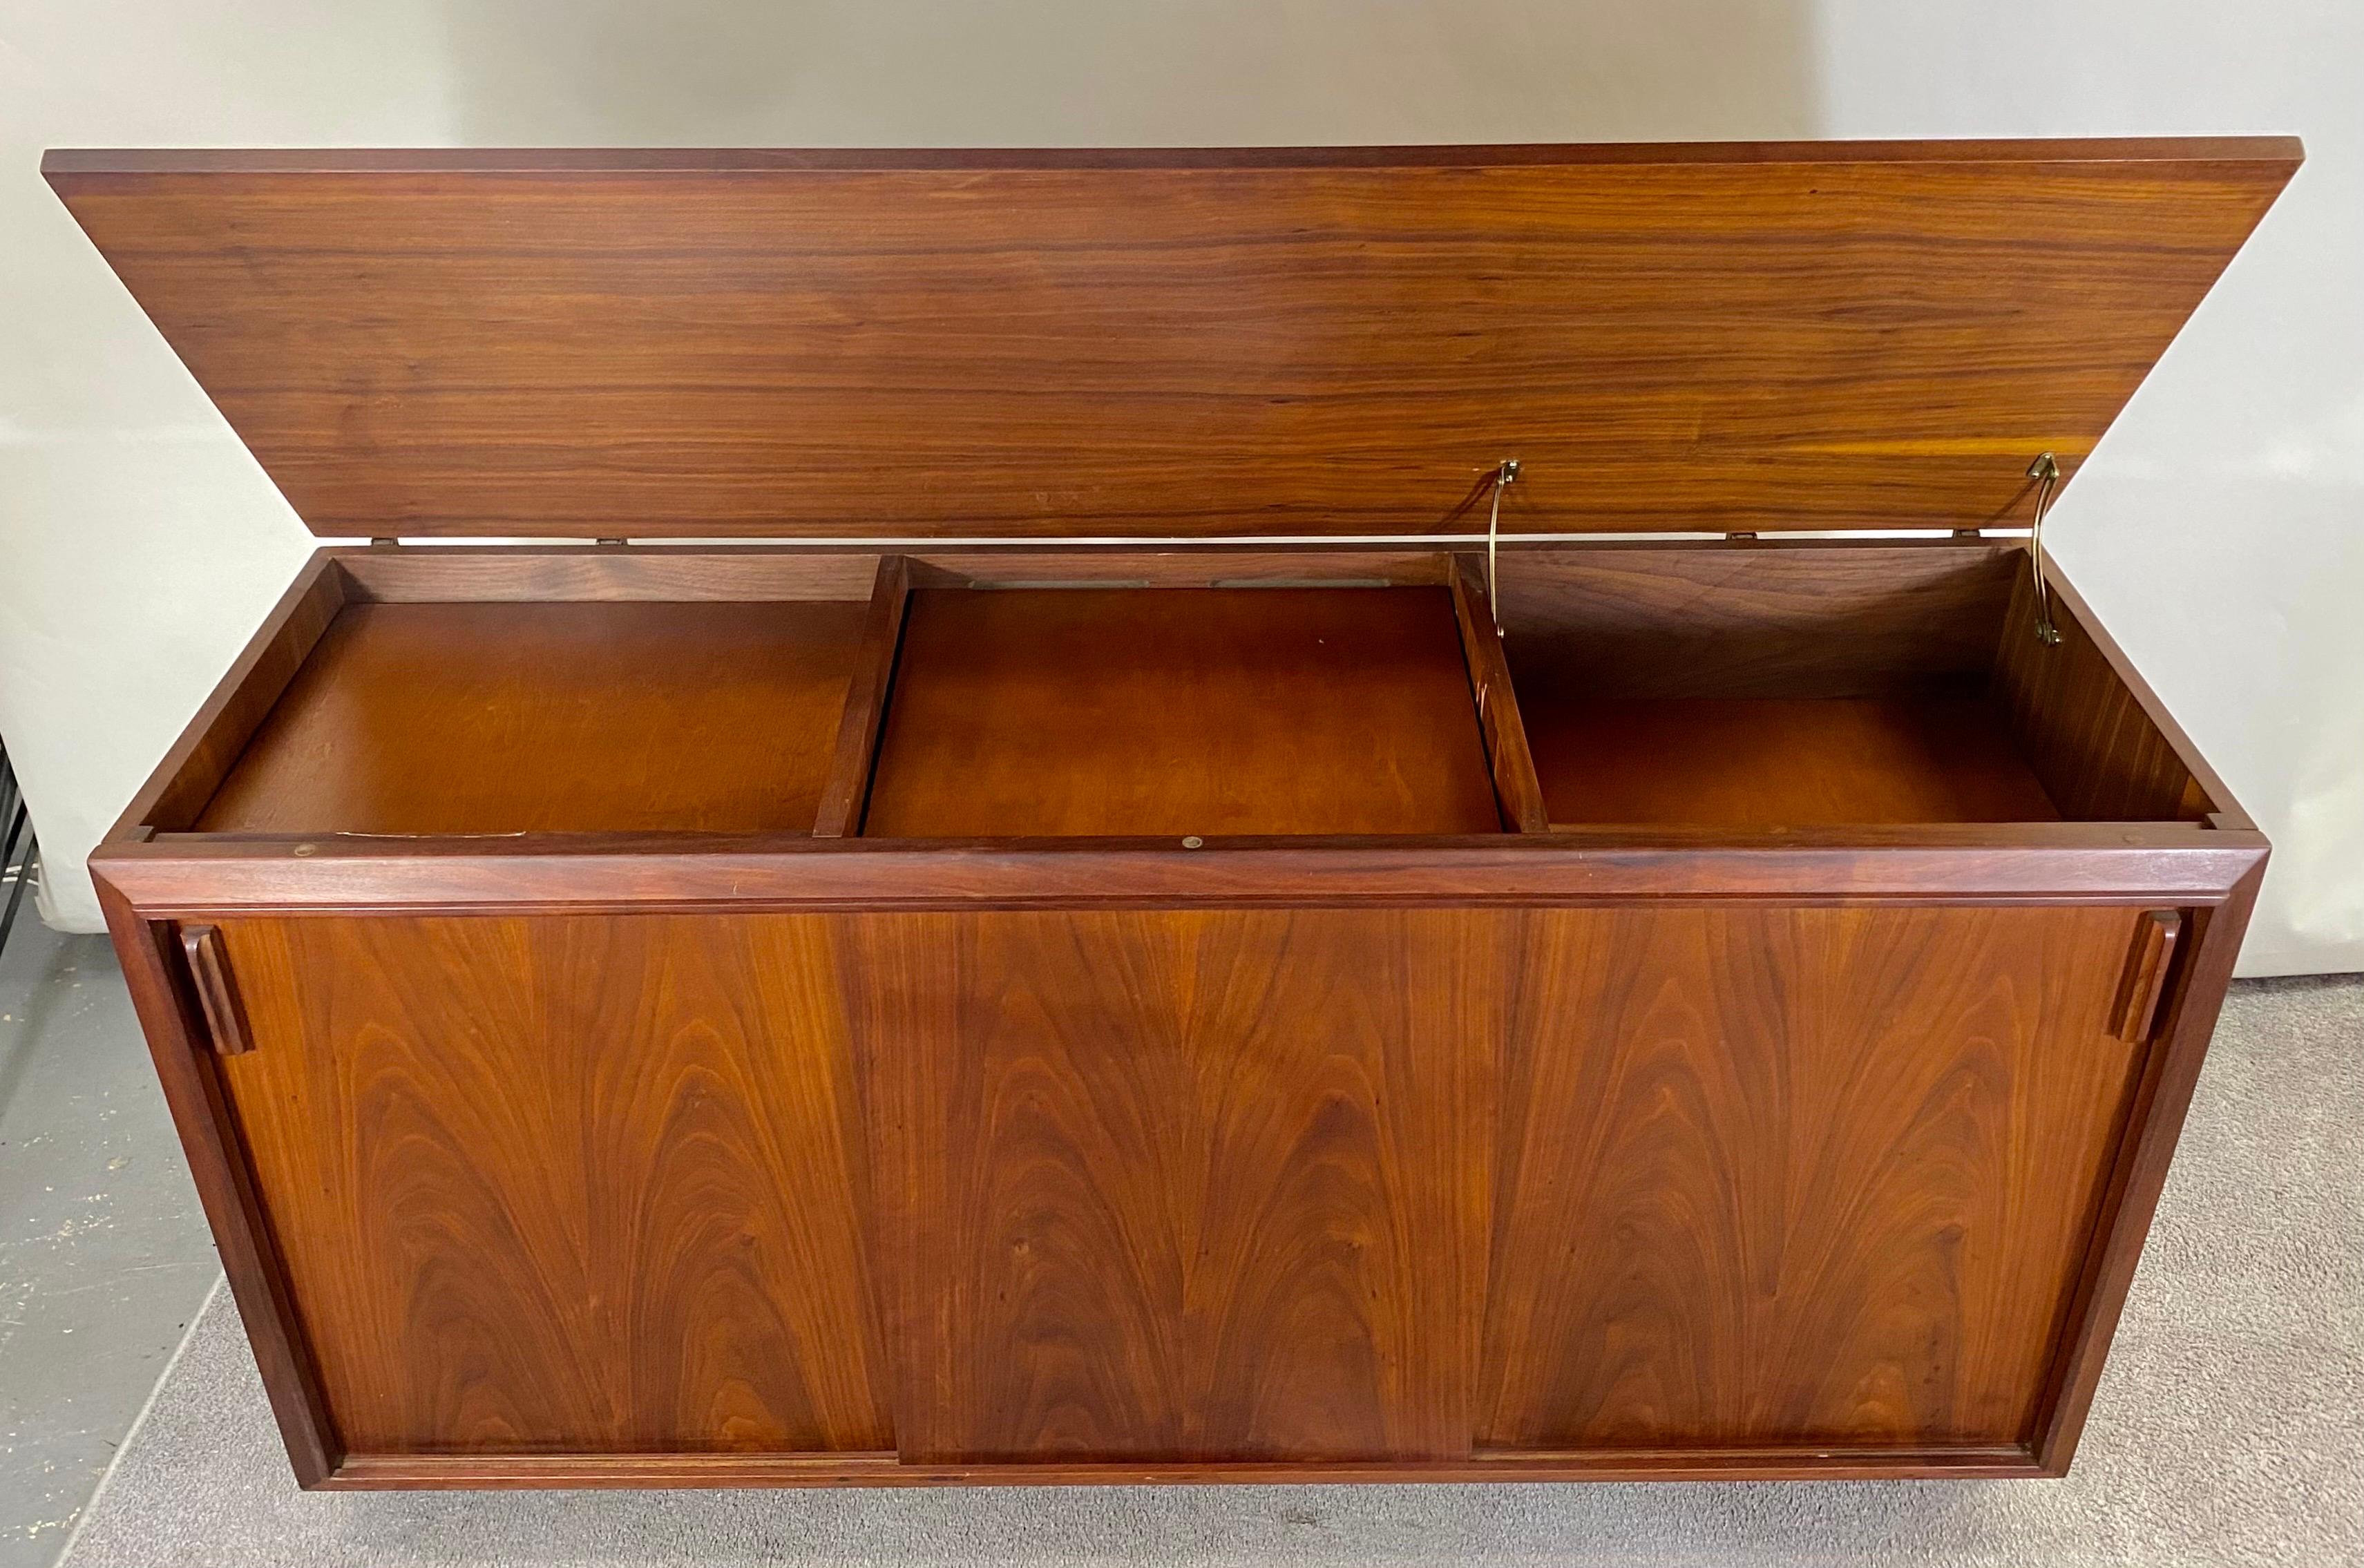 A quality Mid-Century Modern sideboard, credenza by Brazilay. The fine cabinet was originally a stereo console and was converted to sideboard. The Brazilay sideboard features three cabinet spaces for storage space. The top when lifted offers more